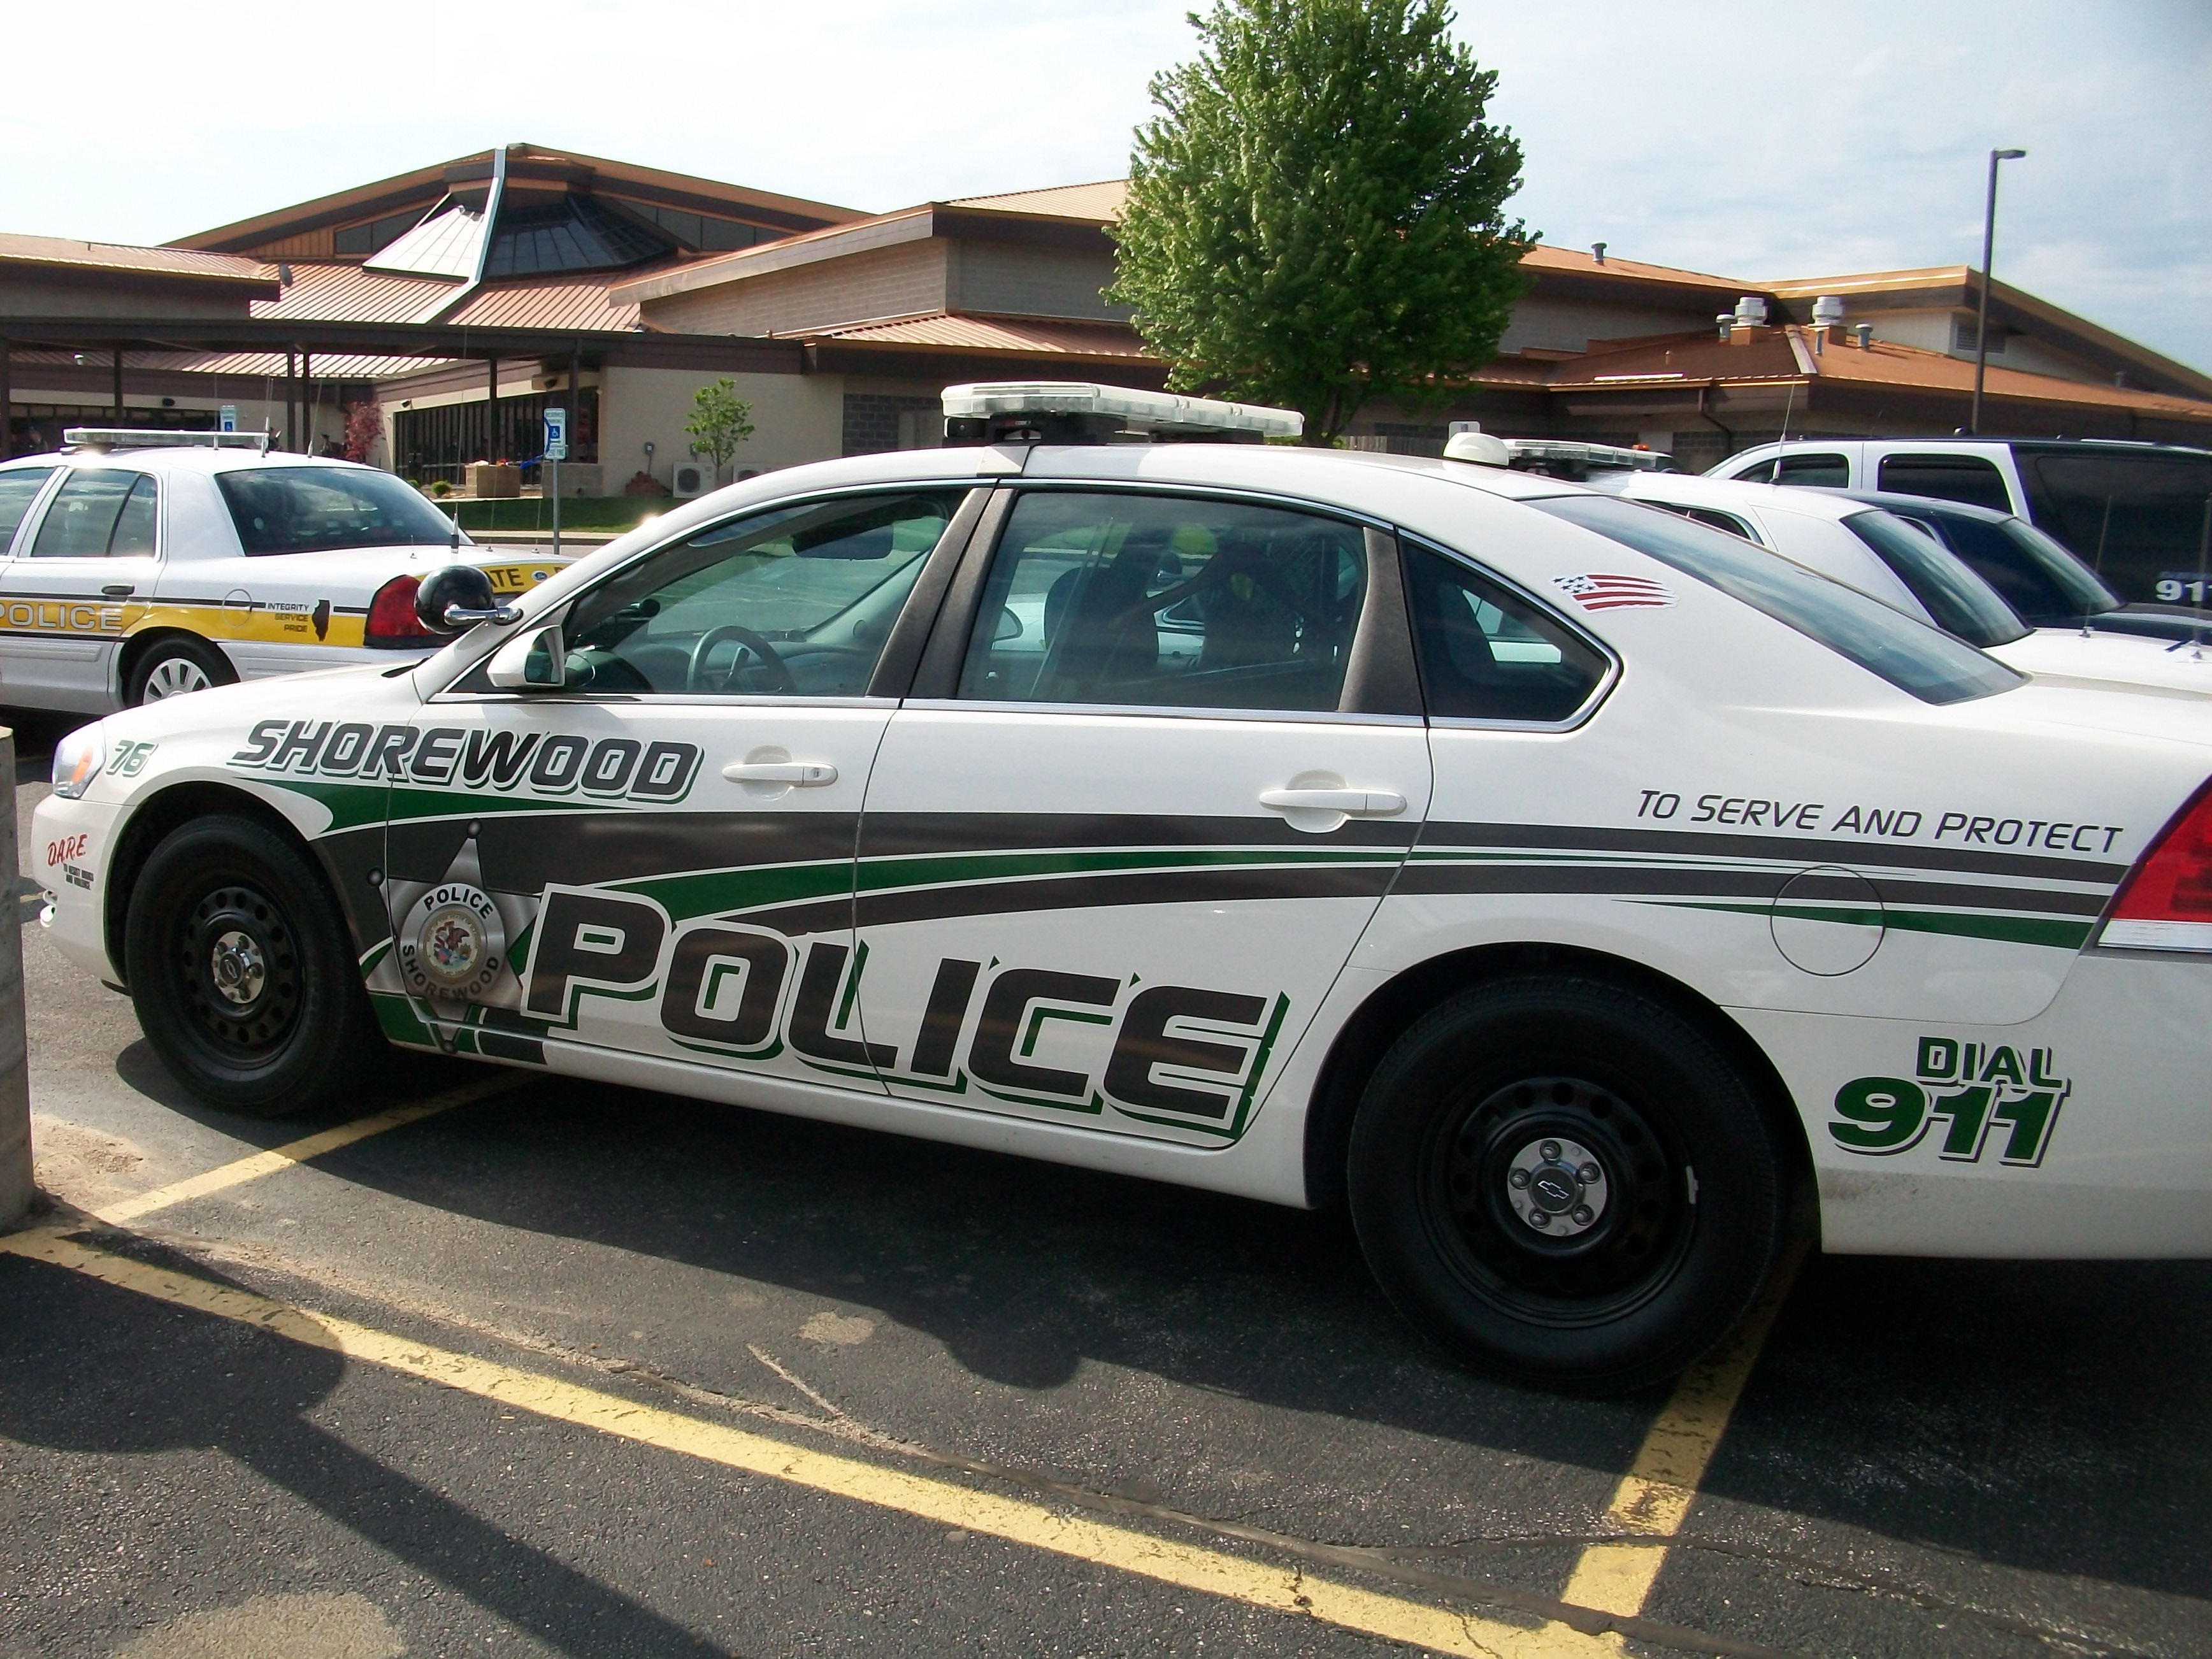 Photo of a Shorewood police car for an article about upcoming Shorewood events.